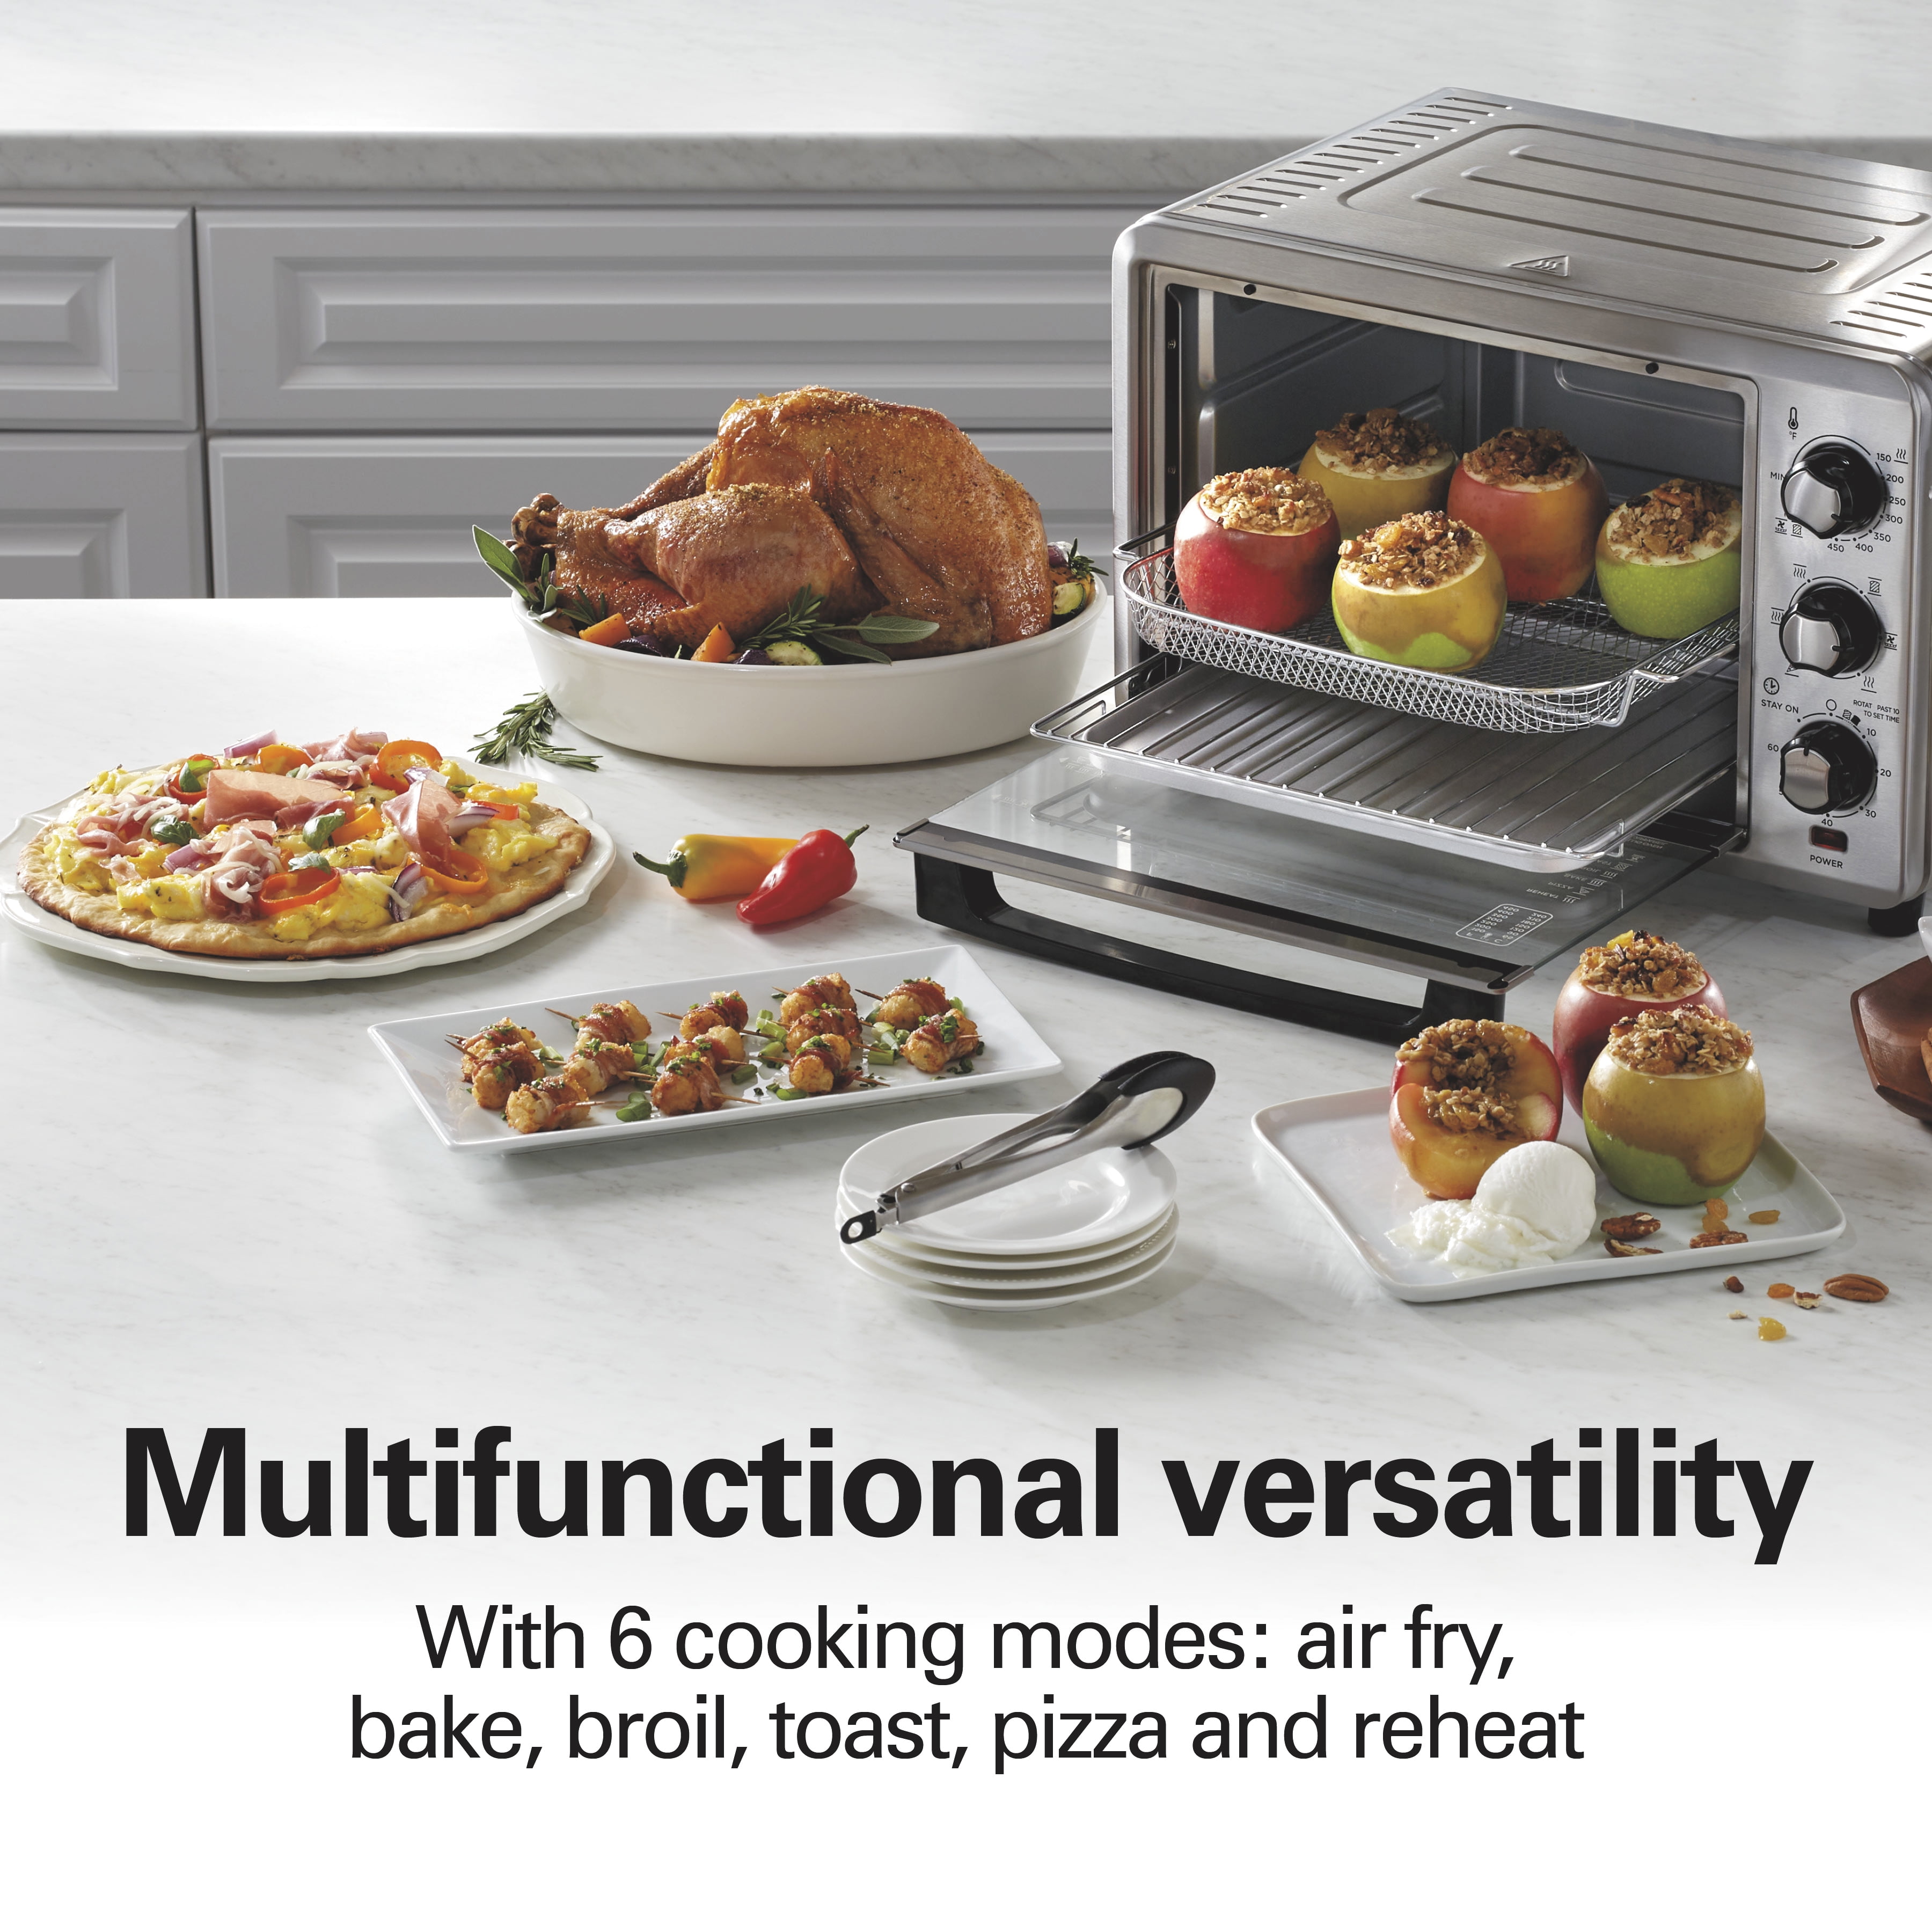 Hamilton Beach Sure-Crisp Toaster Oven Air Fryer Combo, Fits 9” Pizza, 4  Slice Capacity, Powerful Circulation, Auto Shutoff, Stainless Steel (31403)